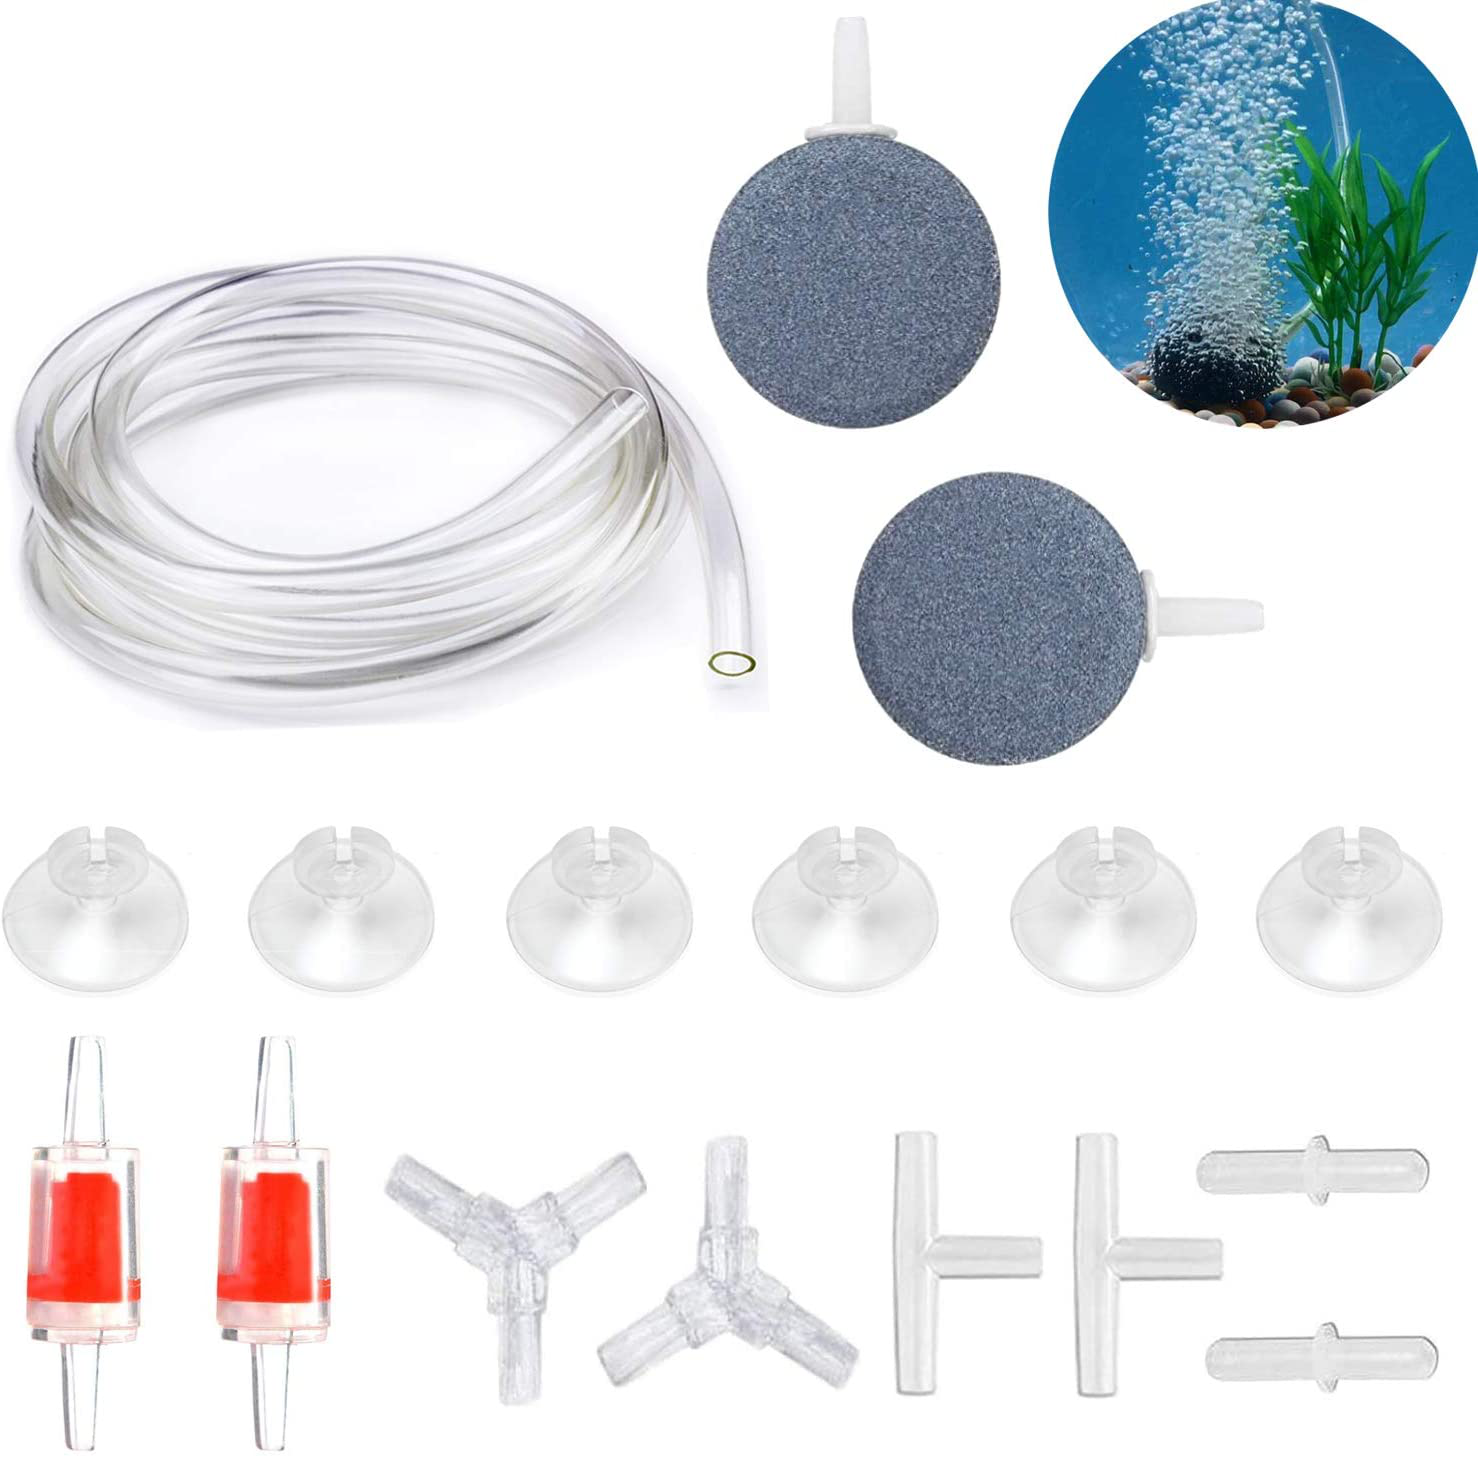 Dekago Transparent Airline Tubing Standard Aquarium Air Pump Accessories Kit with Check Valves, Air Stones, Suction Cups and Connectors for All Fish Tank